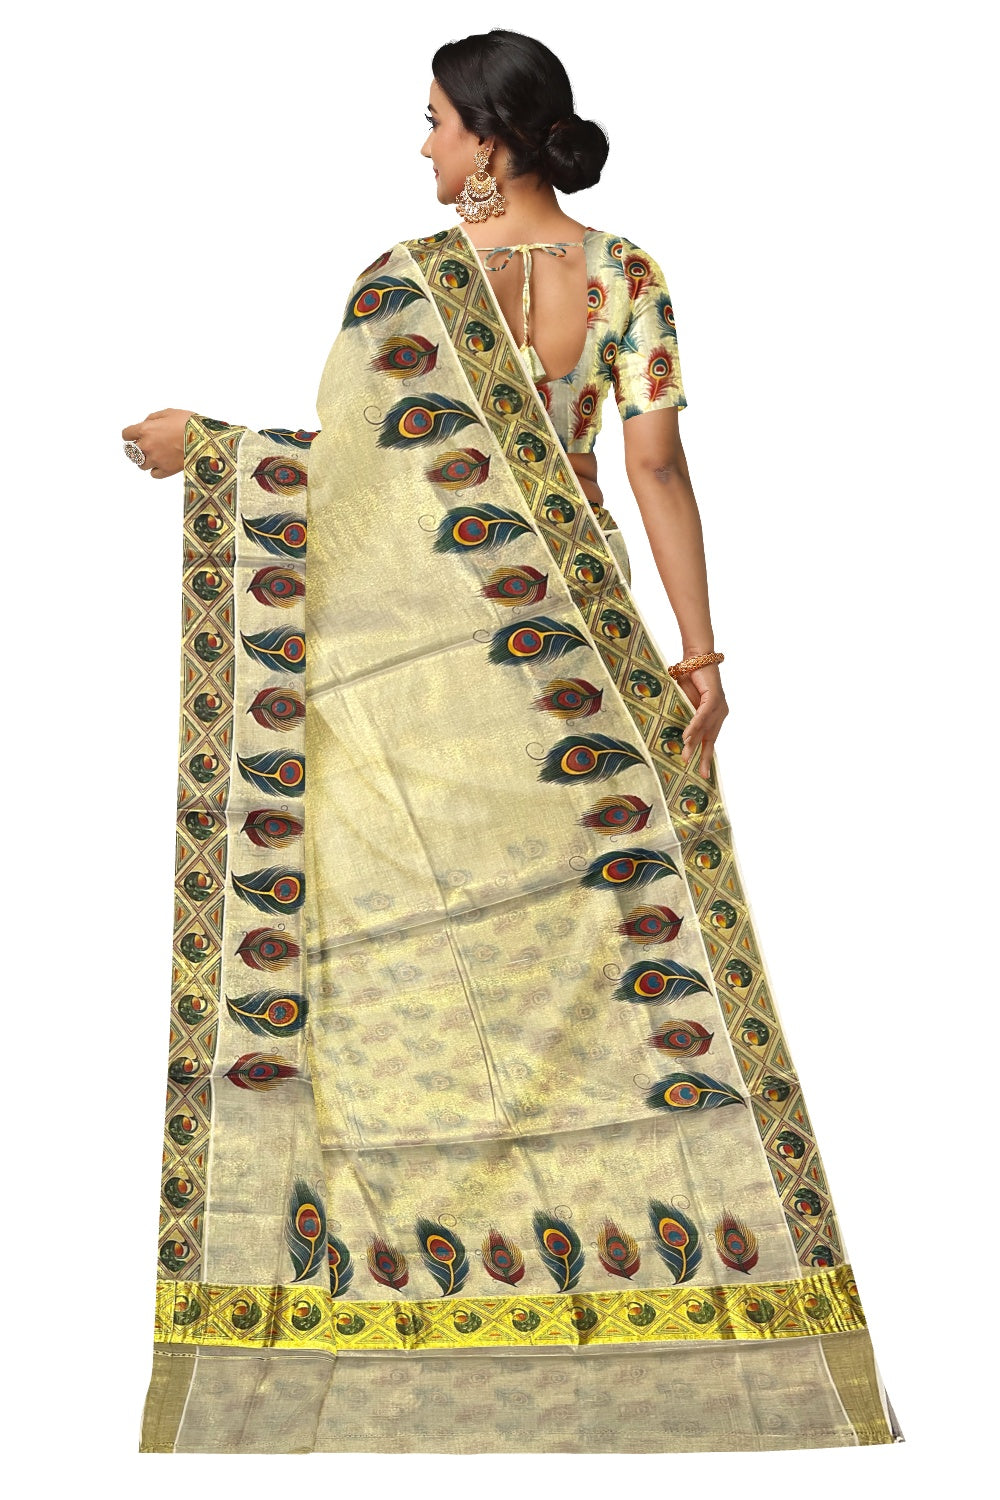 Kerala Tissue Kasavu Saree with Mural Feather Prints and Printed Blouse Piece